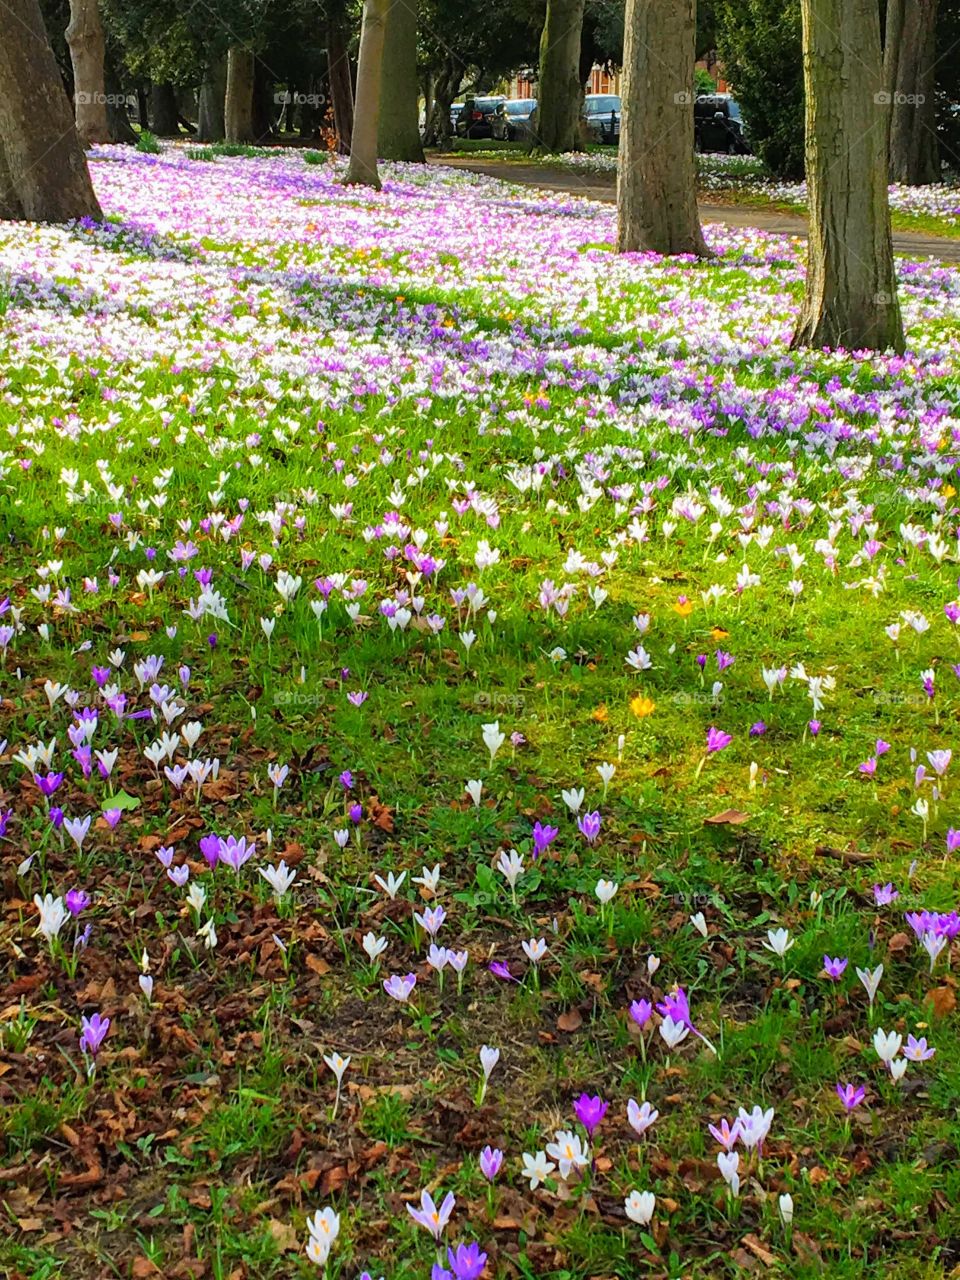 A carpet of mainly purple, pink and white crocus with an odd random yellow one here and there reaching for the sun .. Spring has arrived in my home town .. Every year these Crocus multiply .. beautiful sight  to see and you know it’s Spring 🌷